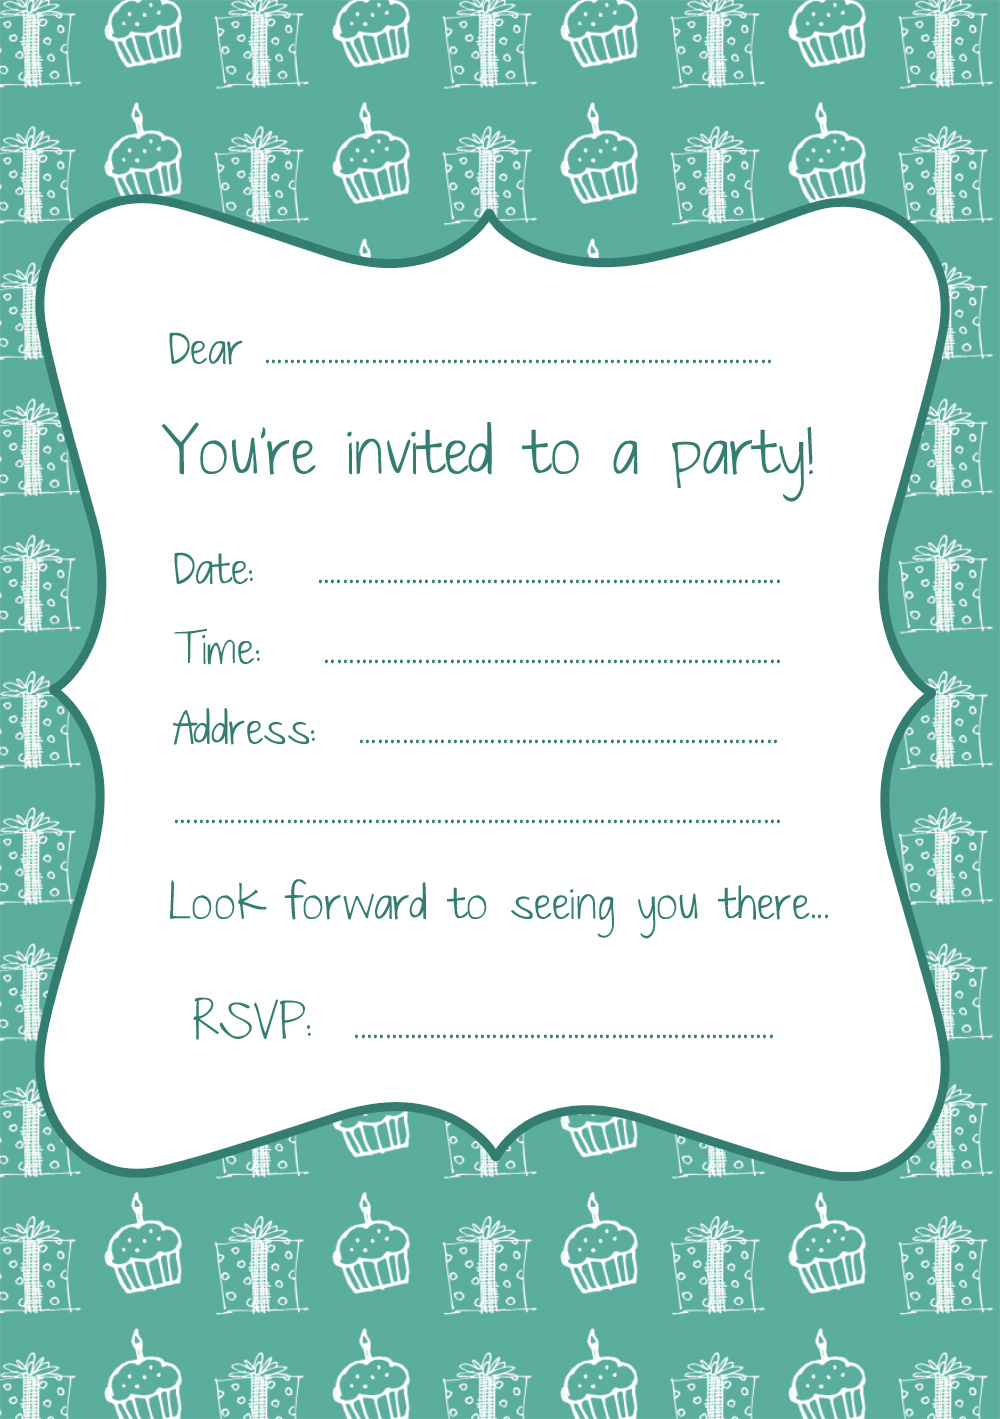 3 FREE Printable Party Invitations Cake And Presents Free Party 